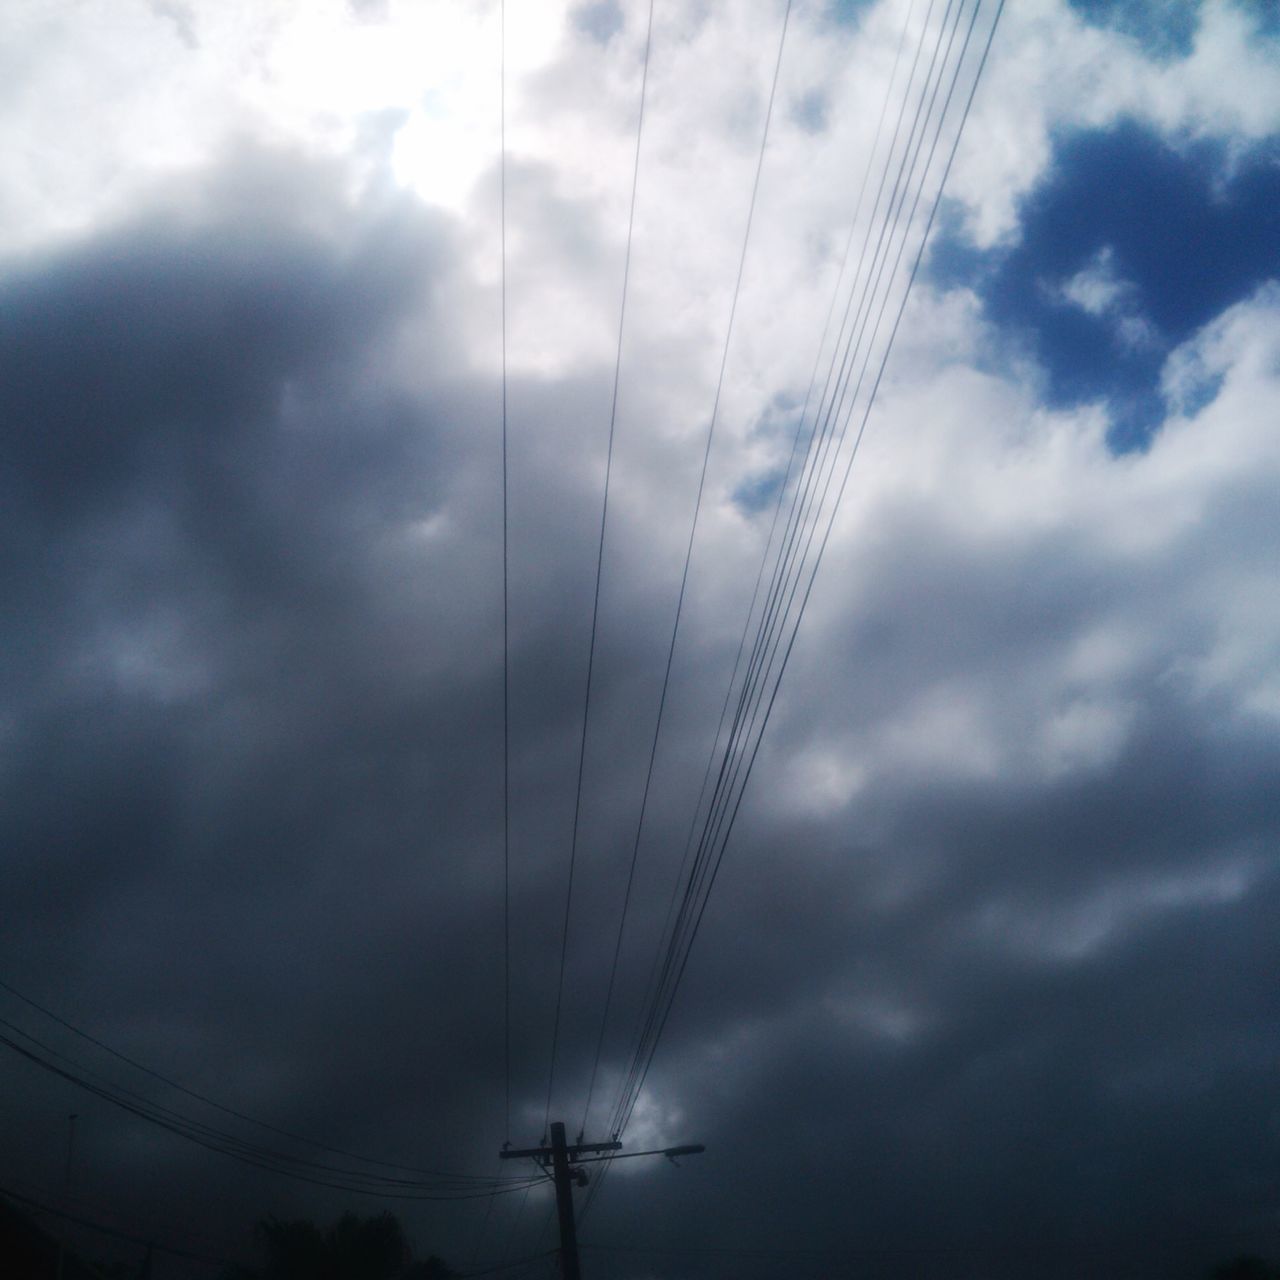 low angle view, power line, sky, electricity, connection, electricity pylon, cloud - sky, power supply, cable, cloudy, technology, fuel and power generation, silhouette, cloud, outdoors, nature, dusk, no people, weather, complexity